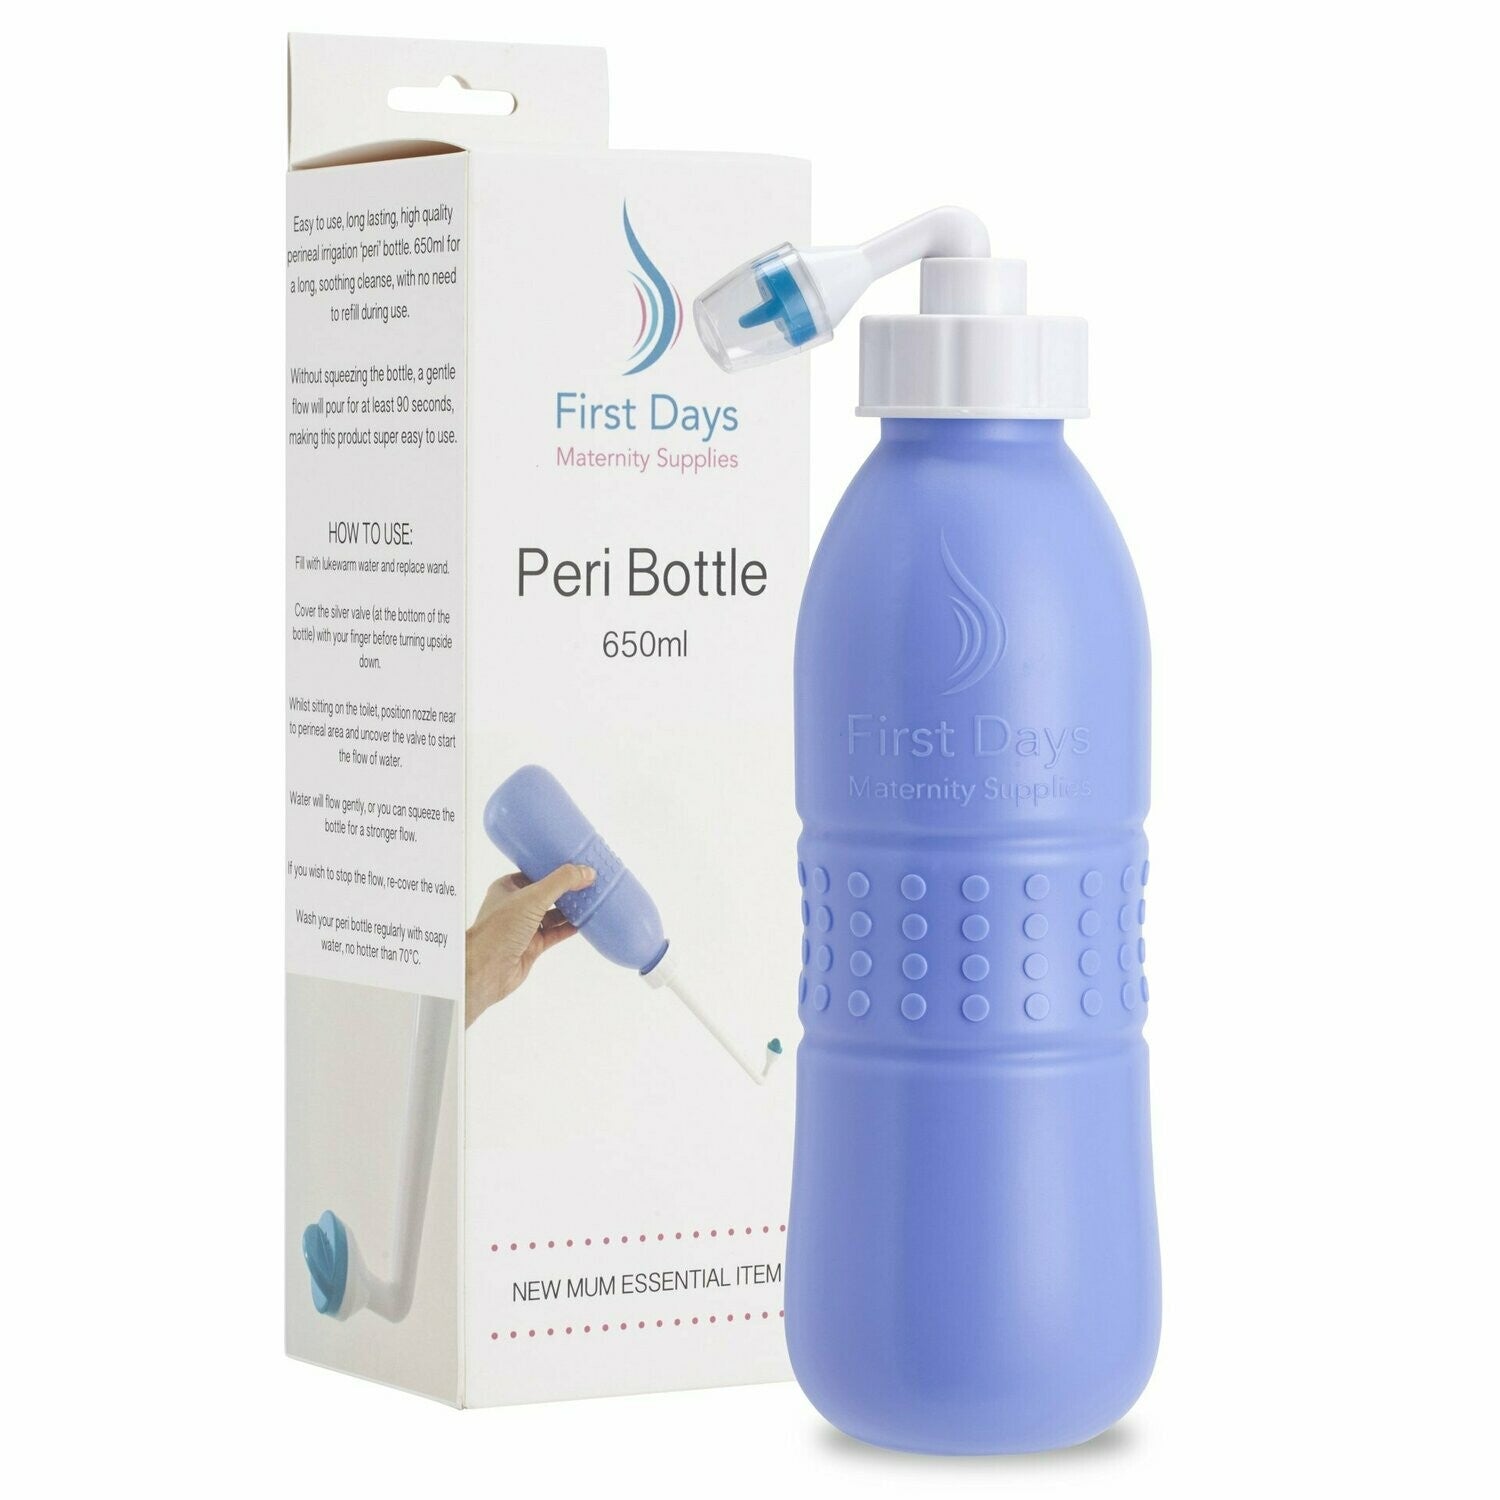 Peri Bottle – Relax and Recover